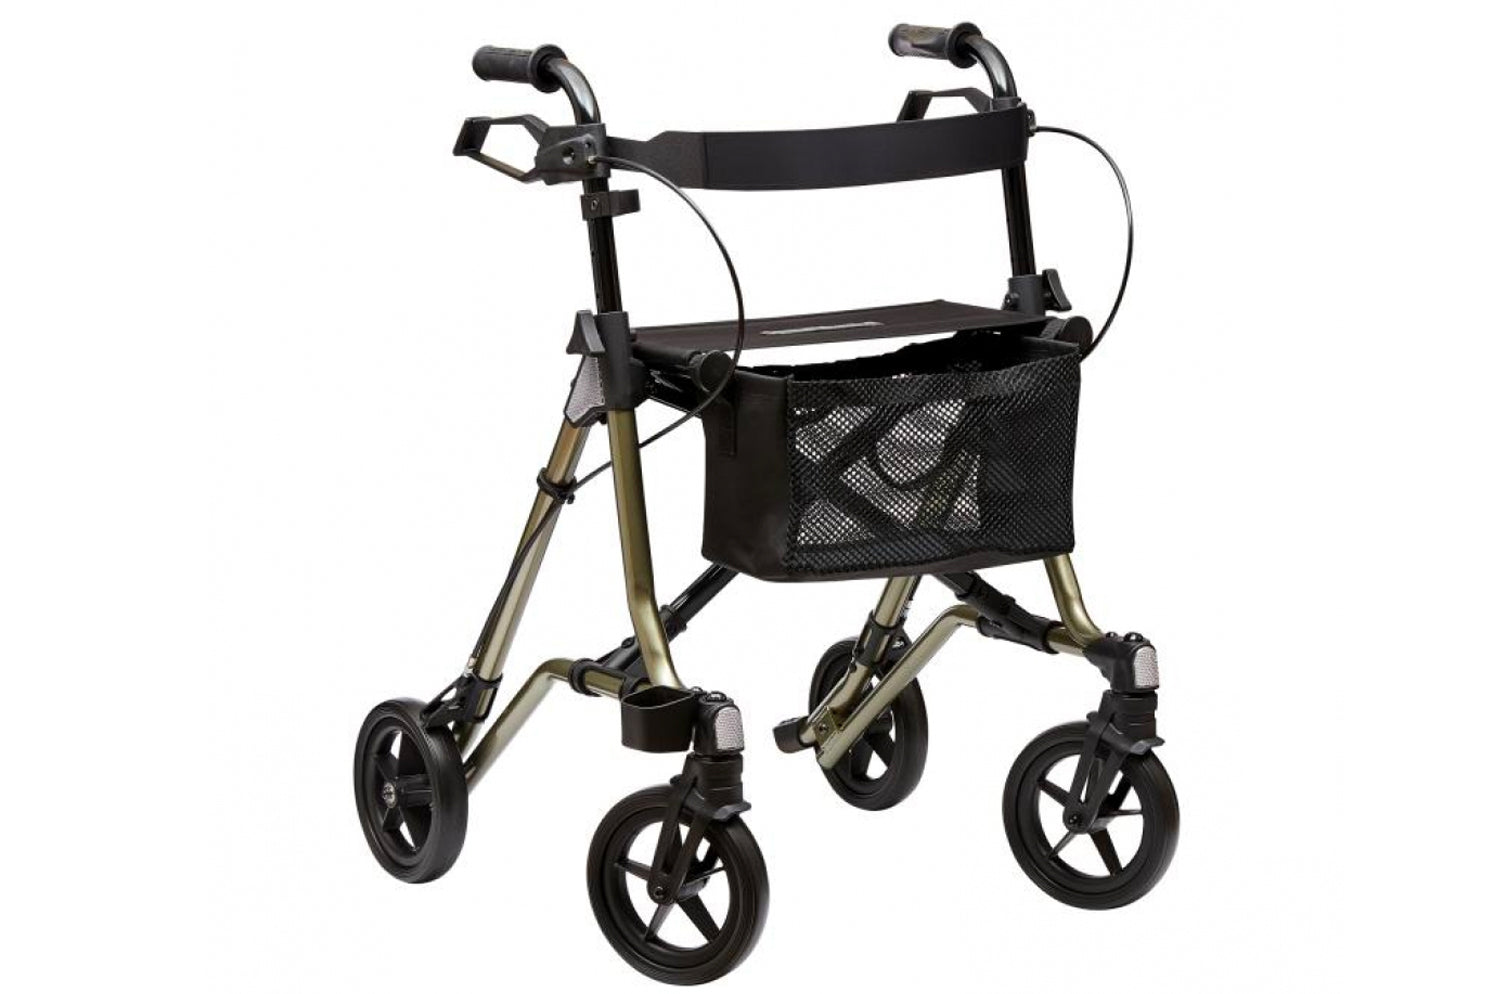 Dietz Taima M-GT Lightweight Aluminium Rollator Foldable with Back Strap and Bag